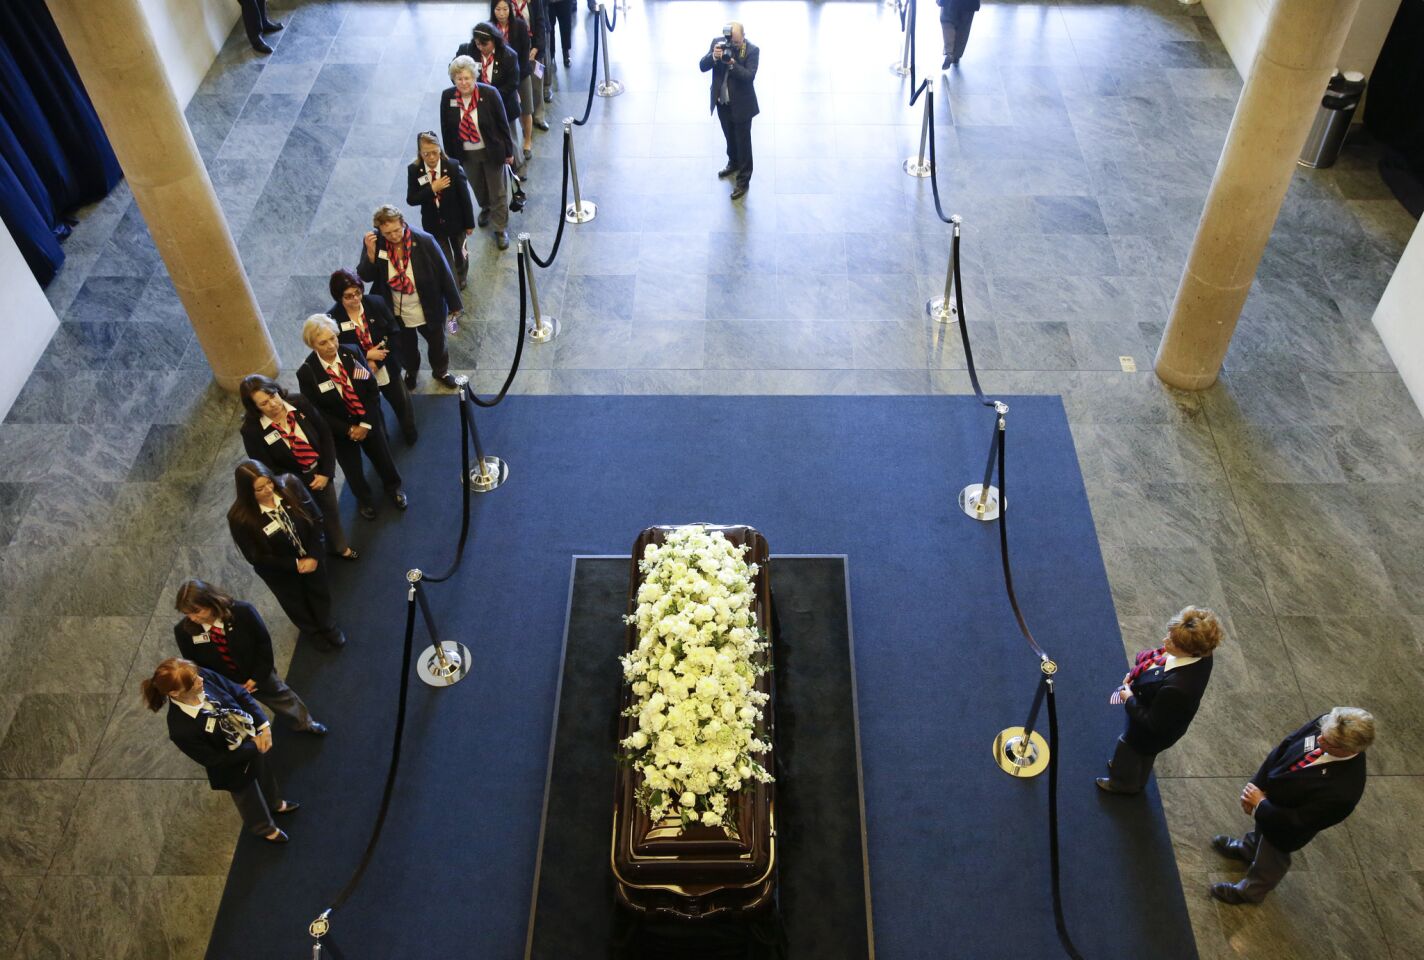 Library volunteers pause as they pay their respects beside the casket of Nancy Reagan at the Ronald Reagan Presidential Library in Simi Valley.